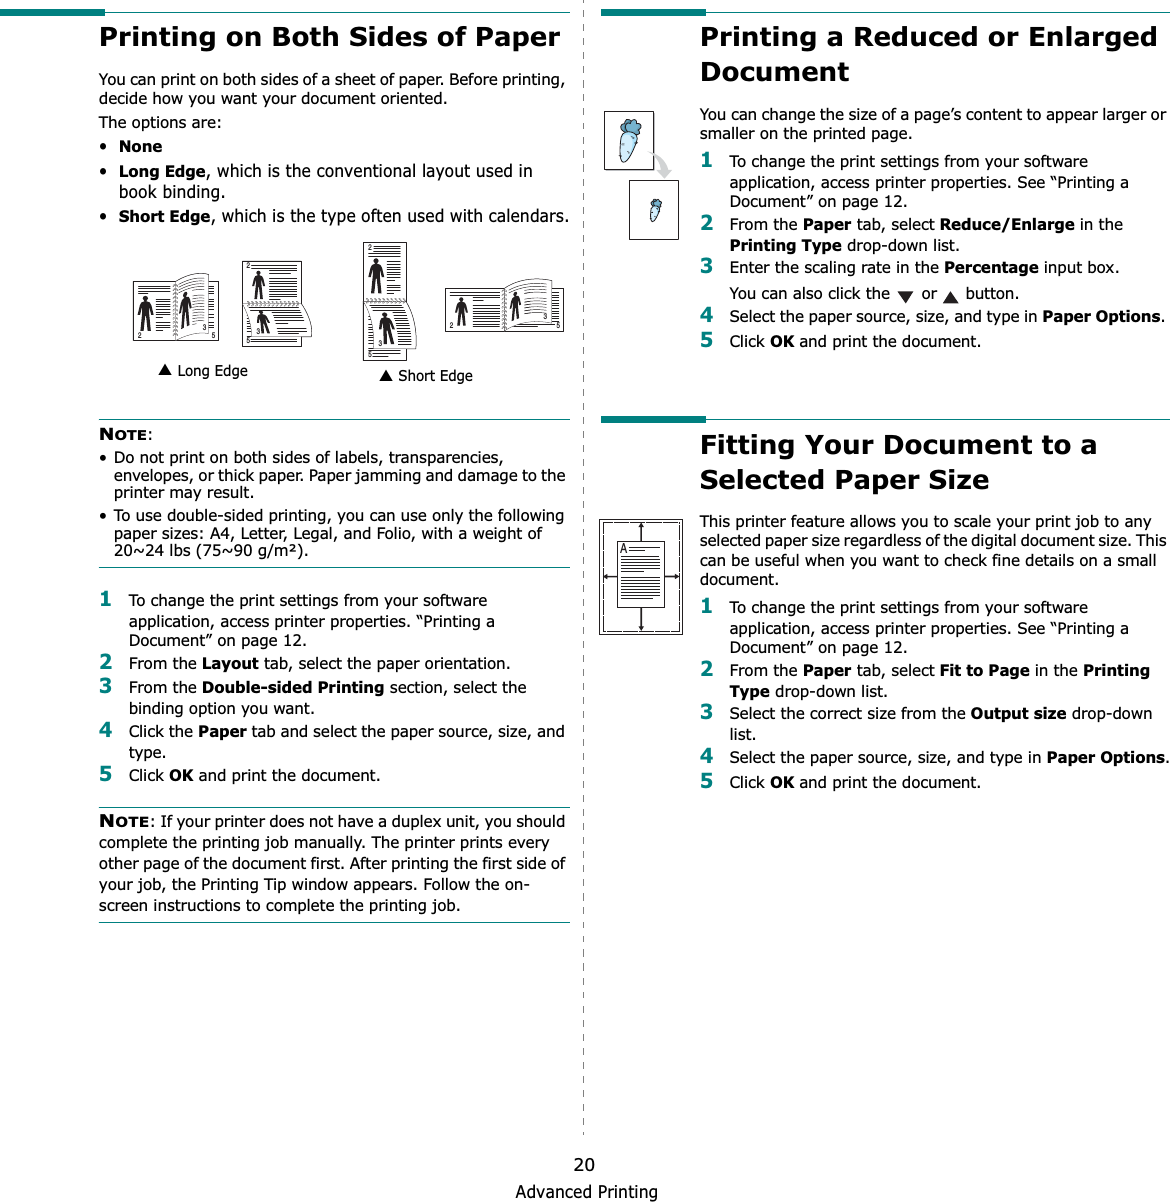 Advanced Printing20Printing on Both Sides of PaperYou can print on both sides of a sheet of paper. Before printing, decide how you want your document oriented.The options are:•None•Long Edge, which is the conventional layout used in book binding.•Short Edge, which is the type often used with calendars.NOTE:• Do not print on both sides of labels, transparencies, envelopes, or thick paper. Paper jamming and damage to the printer may result. • To use double-sided printing, you can use only the following paper sizes: A4, Letter, Legal, and Folio, with a weight of 20~24 lbs (75~90 g/m²). 1To change the print settings from your software application, access printer properties. “Printing a Document” on page 12.2From the Layout tab, select the paper orientation.3From the Double-sided Printing section, select the binding option you want.     4Click the Paper tab and select the paper source, size, and type.5Click OK and print the document.NOTE: If your printer does not have a duplex unit, you should complete the printing job manually. The printer prints every other page of the document first. After printing the first side of your job, the Printing Tip window appears. Follow the on-screen instructions to complete the printing job. Long Edge▲ Short Edge▲253253253253Printing a Reduced or Enlarged Document You can change the size of a page’s content to appear larger or smaller on the printed page. 1To change the print settings from your software application, access printer properties. See “Printing a Document” on page 12. 2From the Paper tab, select Reduce/Enlarge in the Printing Type drop-down list. 3Enter the scaling rate in the Percentage input box.You can also click the   or   button.4Select the paper source, size, and type in Paper Options.5Click OK and print the document. Fitting Your Document to a Selected Paper SizeThis printer feature allows you to scale your print job to any selected paper size regardless of the digital document size. This can be useful when you want to check fine details on a small document. 1To change the print settings from your software application, access printer properties. See “Printing a Document” on page 12.2From the Paper tab, select Fit to Page in the Printing Type drop-down list. 3Select the correct size from the Output size drop-down list.4Select the paper source, size, and type in Paper Options.5Click OK and print the document.A